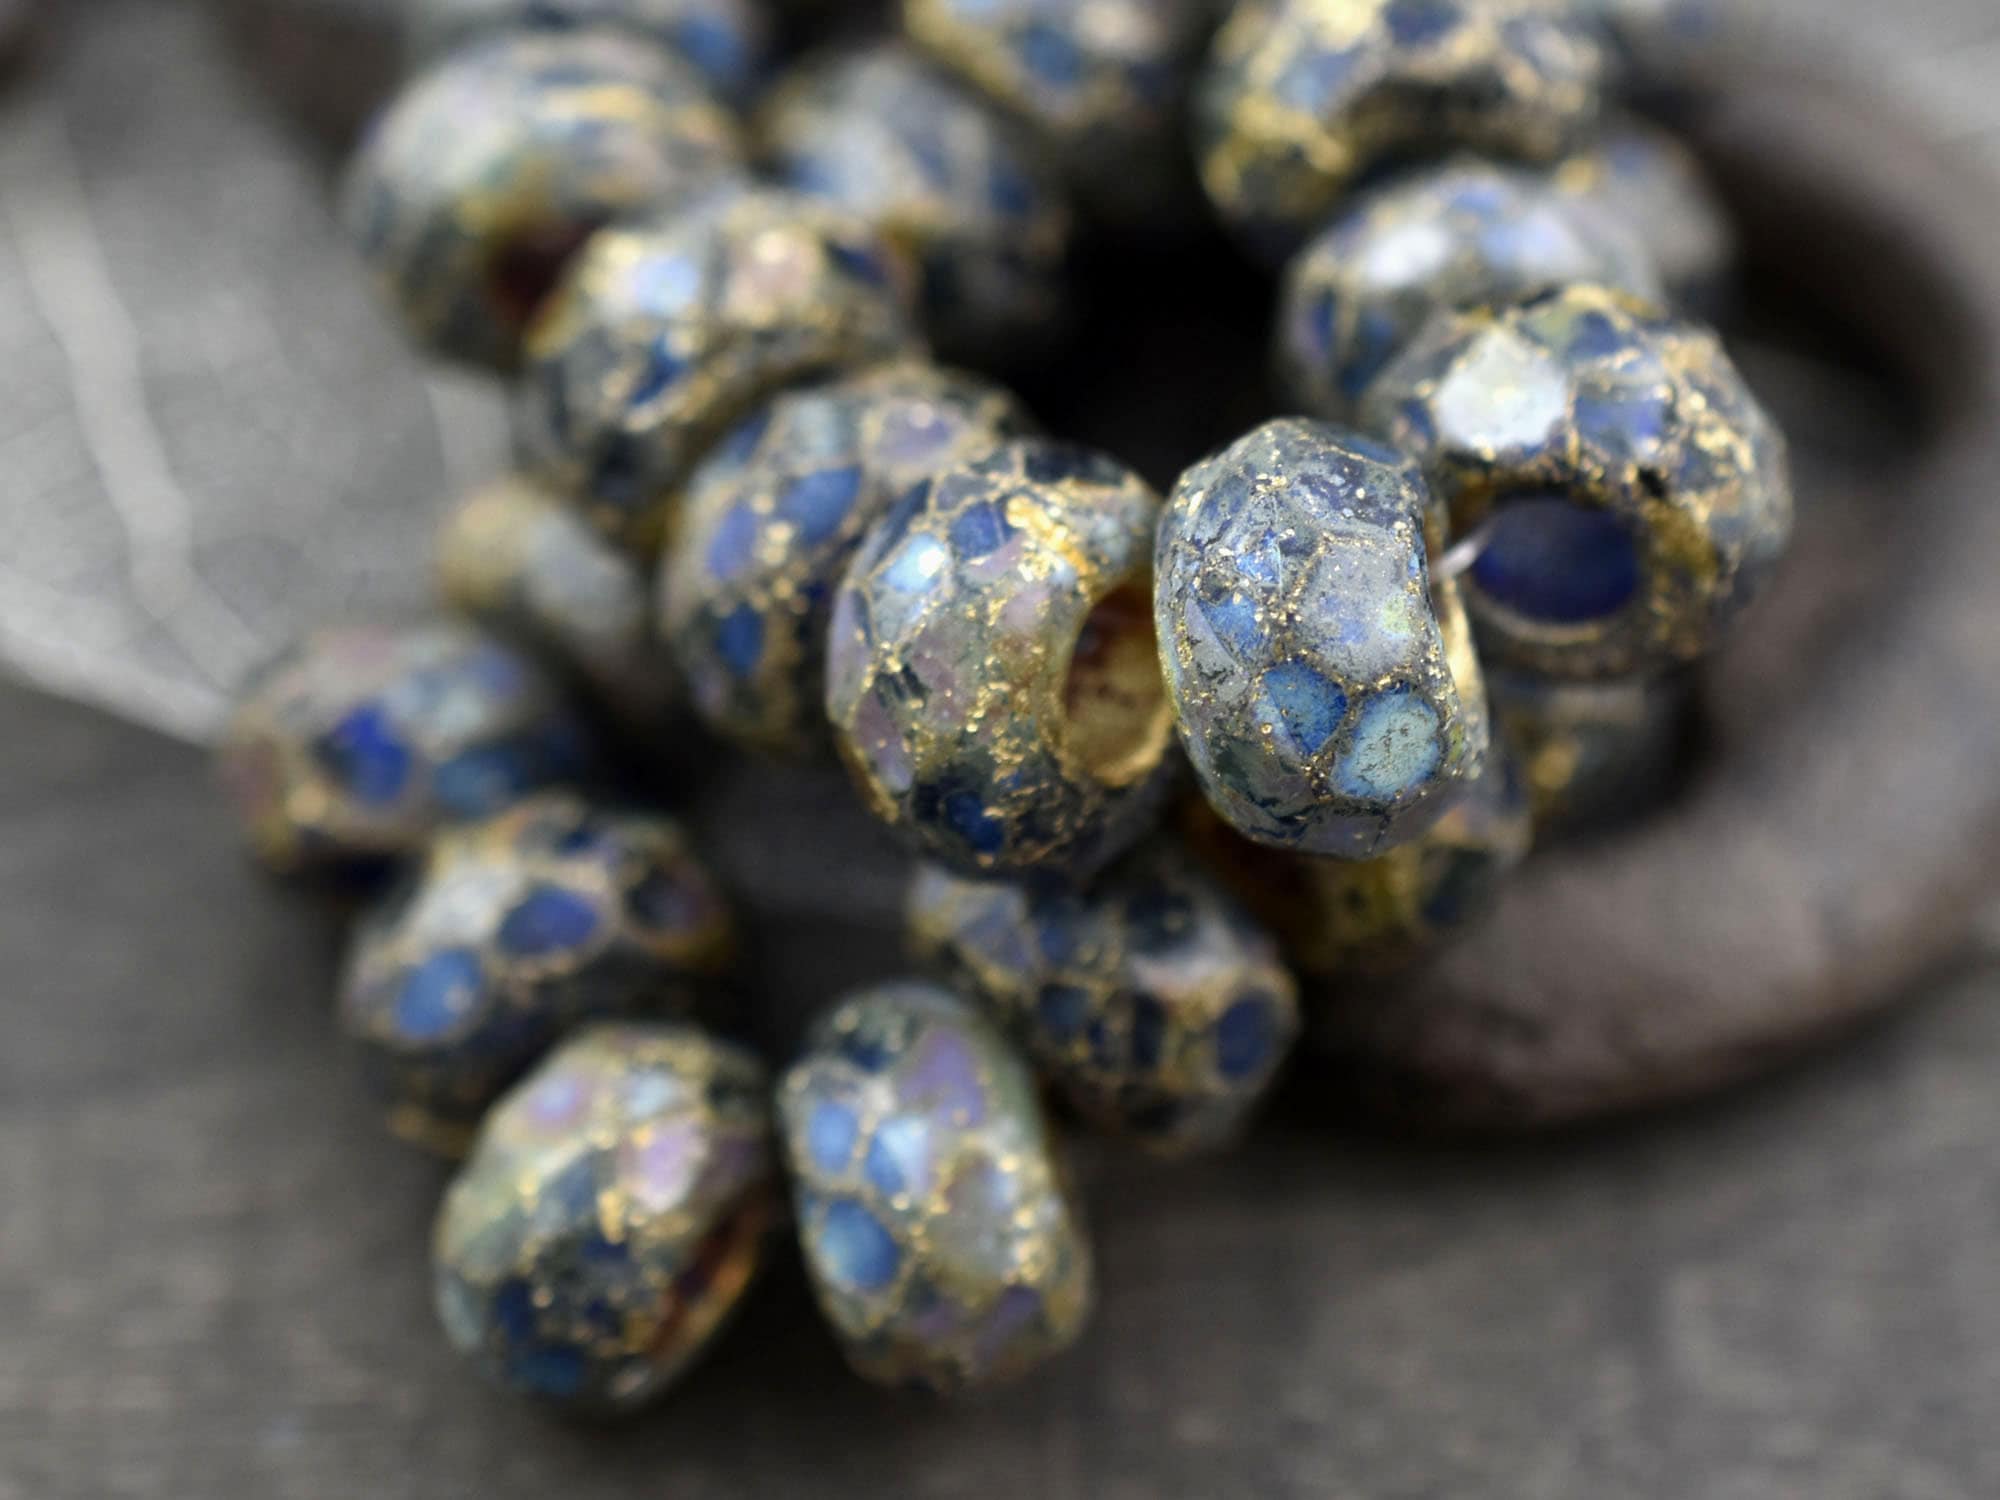 Gunmetal w/ Crystal Rhinestone Rondelle Spacer Beads 6mm (Sku 1600) Czech Glass Beads by GR8BEADS - The Bead Obsession